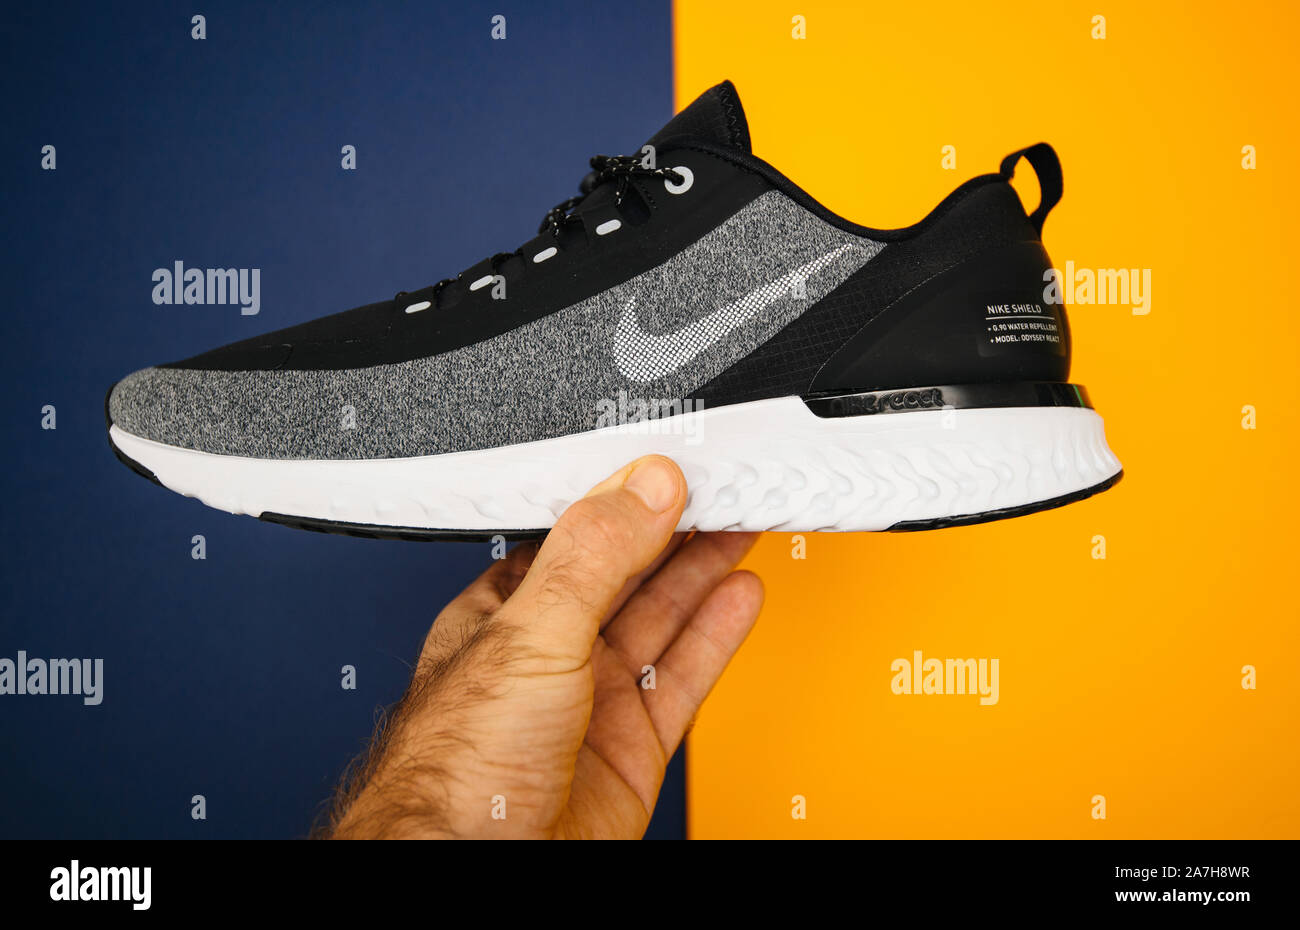 Paris, France - Oct 18, 2019: Side view above blue yellow background new  sport waterproof and windproof running shoe Nike Odyssey React Shield 2 for  f Stock Photo - Alamy